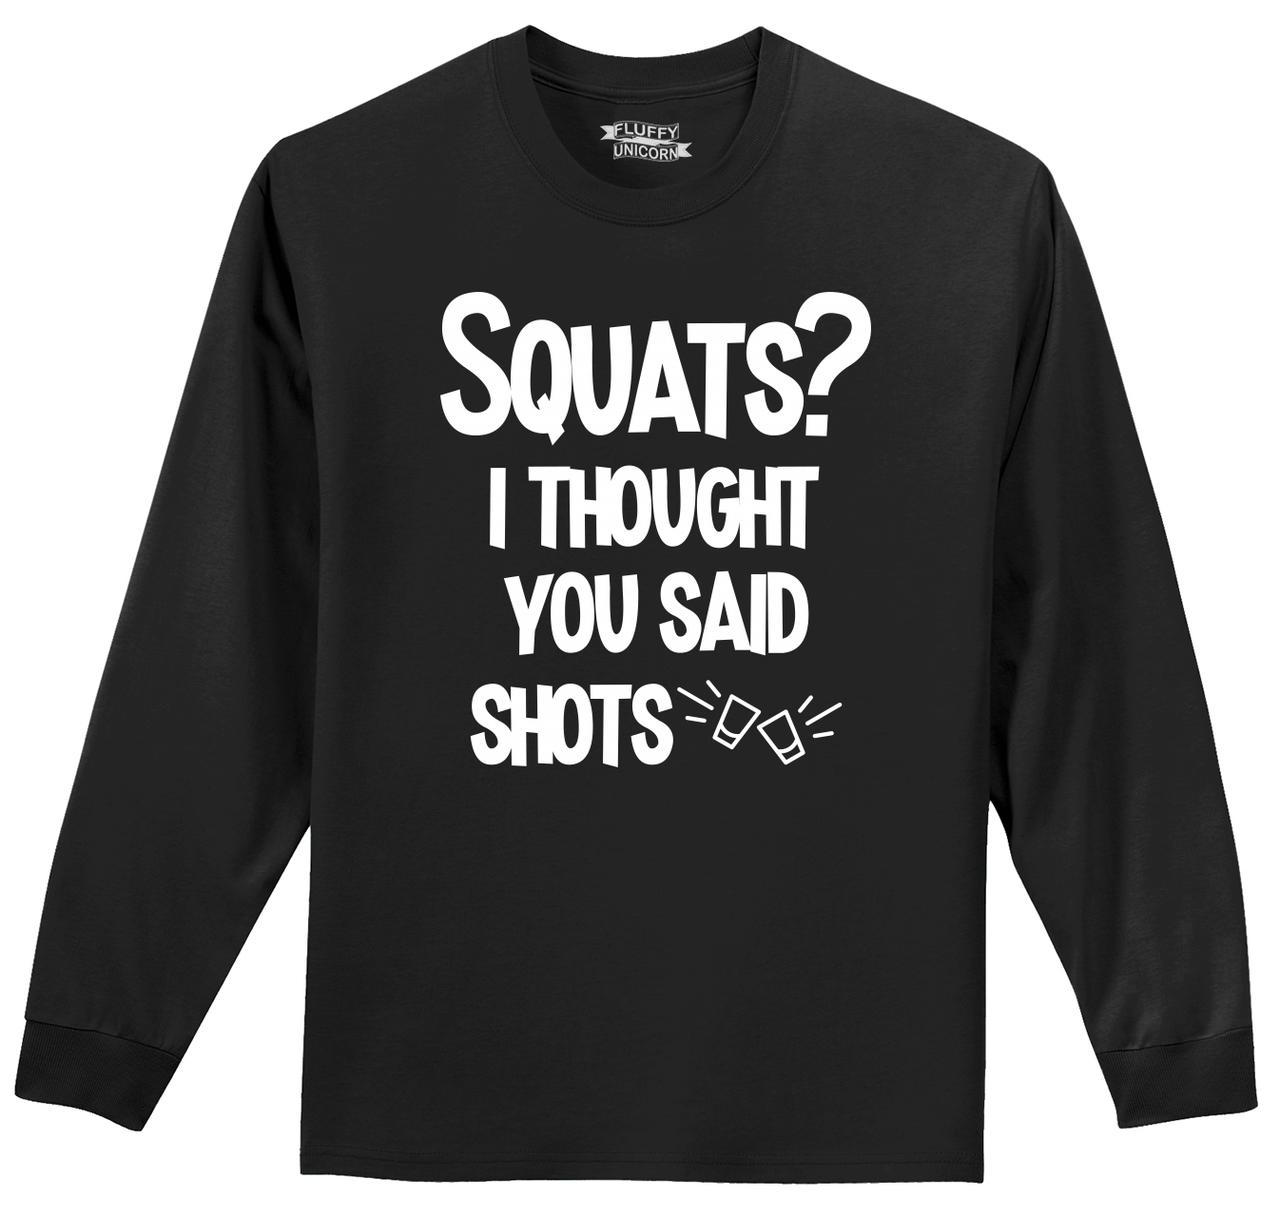 Workout shirt Squat shirt Funny workout shirt Squat day shirt Squats Are My Therapy Hooded Sweatshirt Funny Squats Shirt Gym shirt